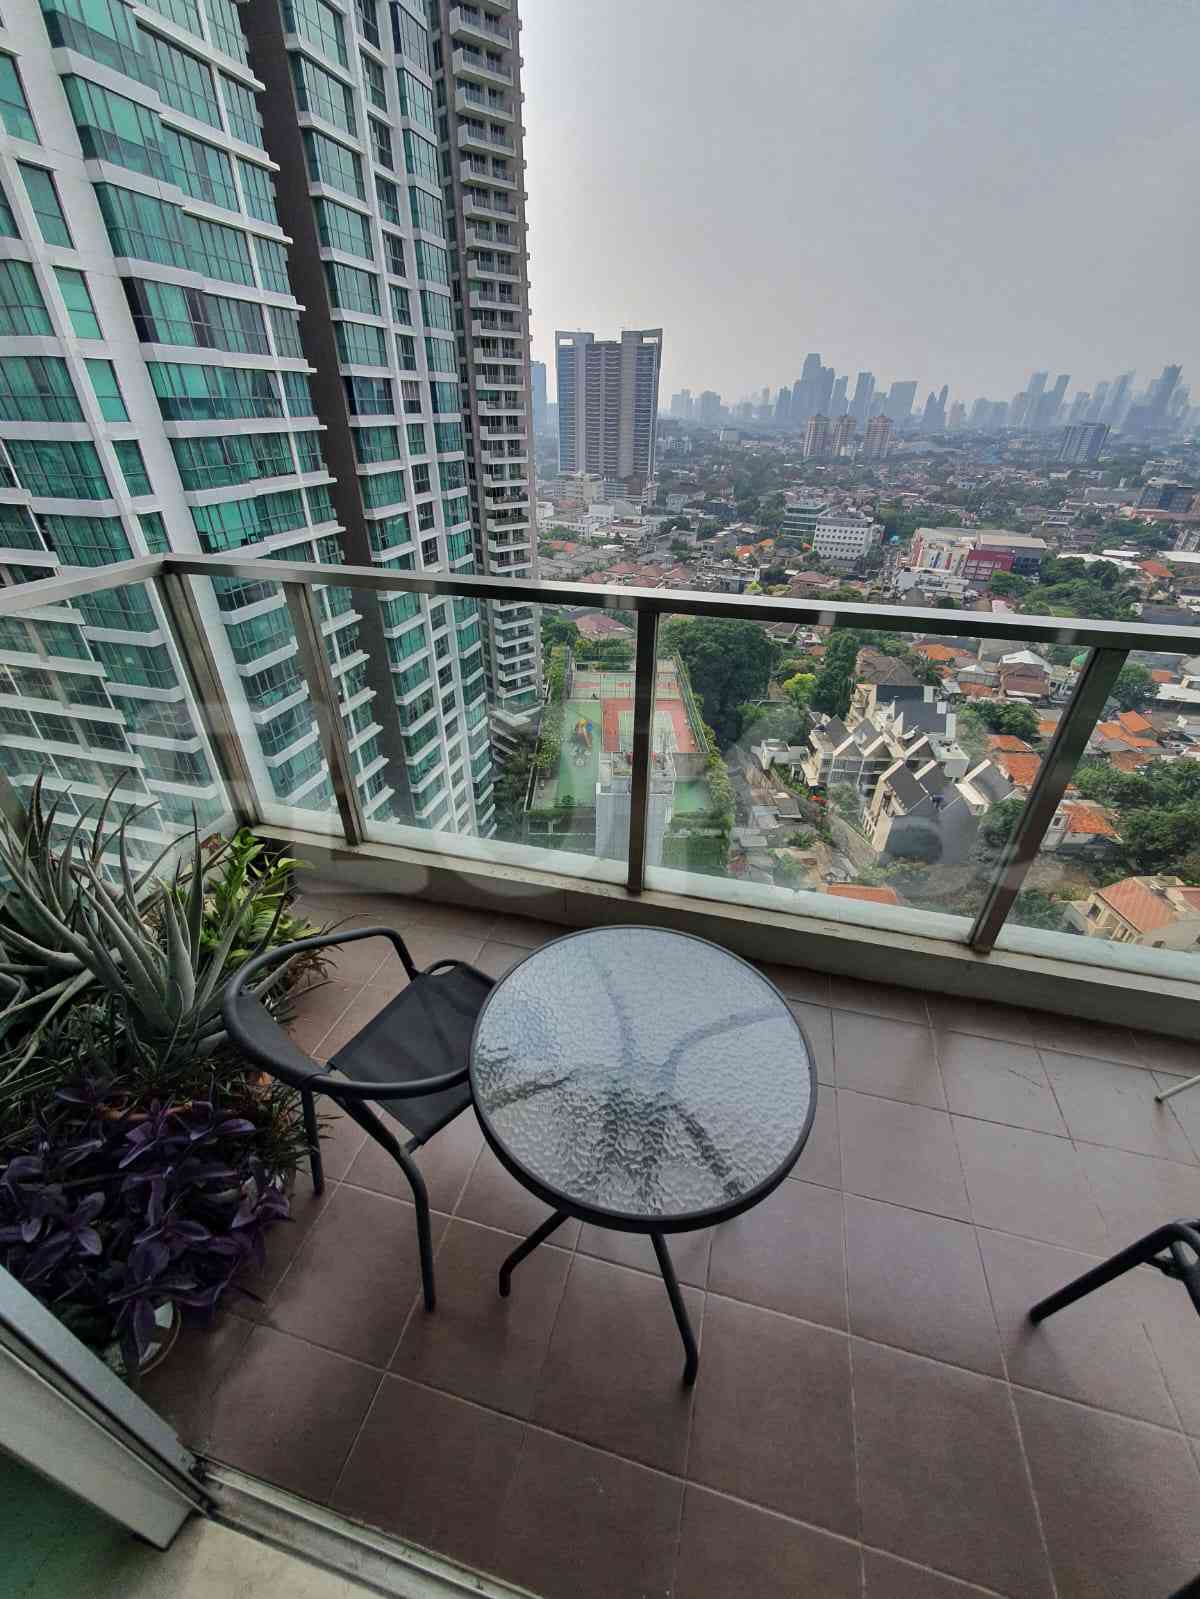 3 Bedroom on 15th Floor for Rent in Kemang Village Residence - fked84 7